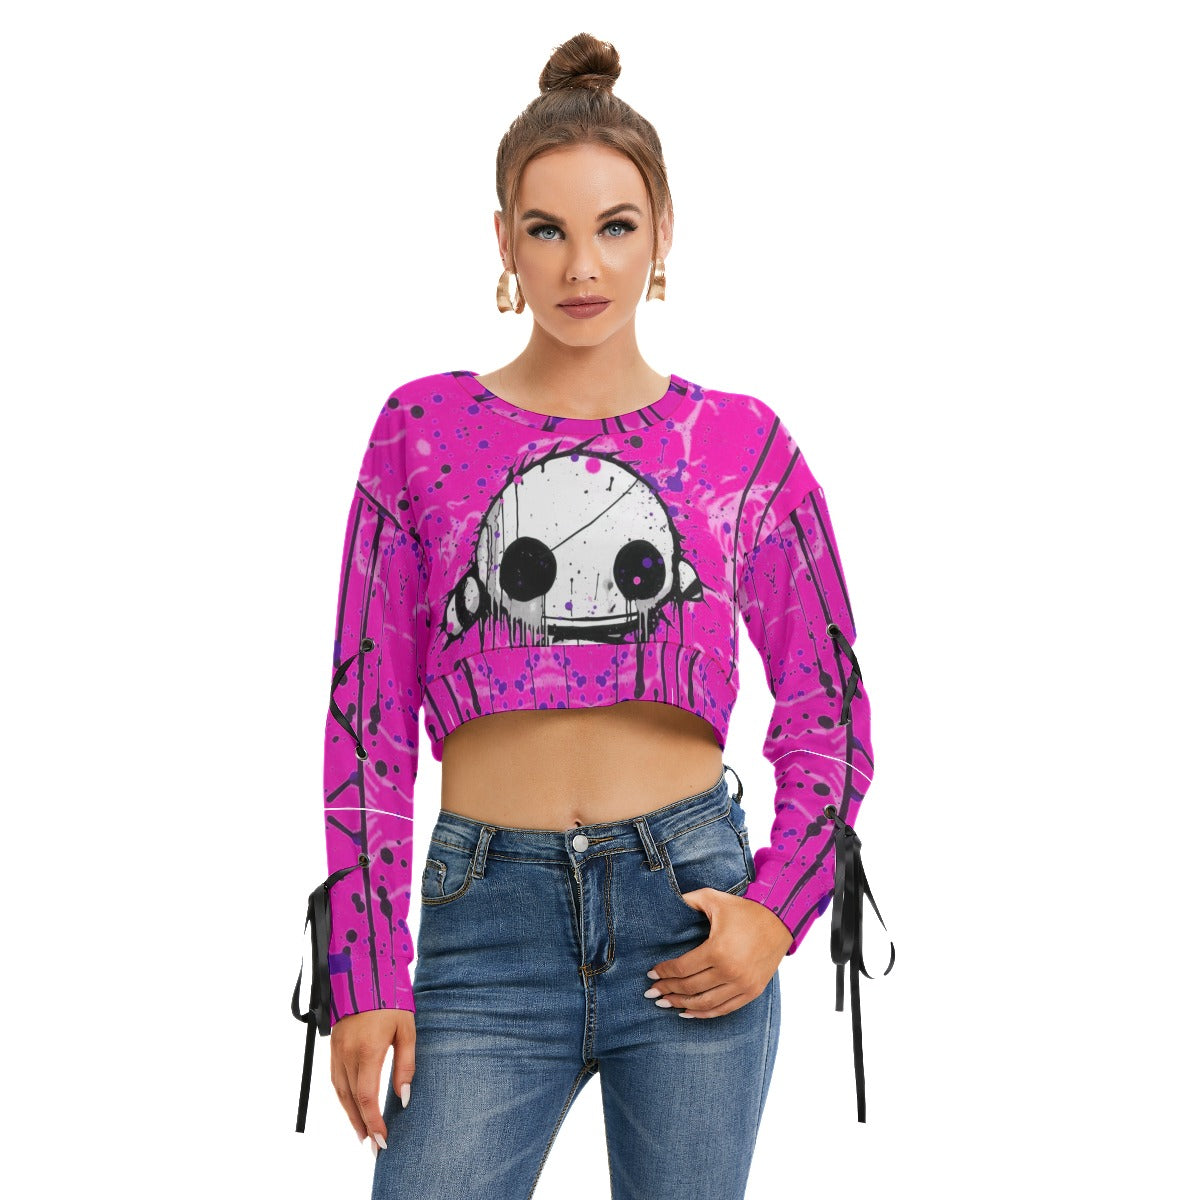 Officially Sexy Creepy Boy Collection Women's Long Sleeve Cropped Bubble Gum Pink Sweatshirt With Lace-up Sleeves Front